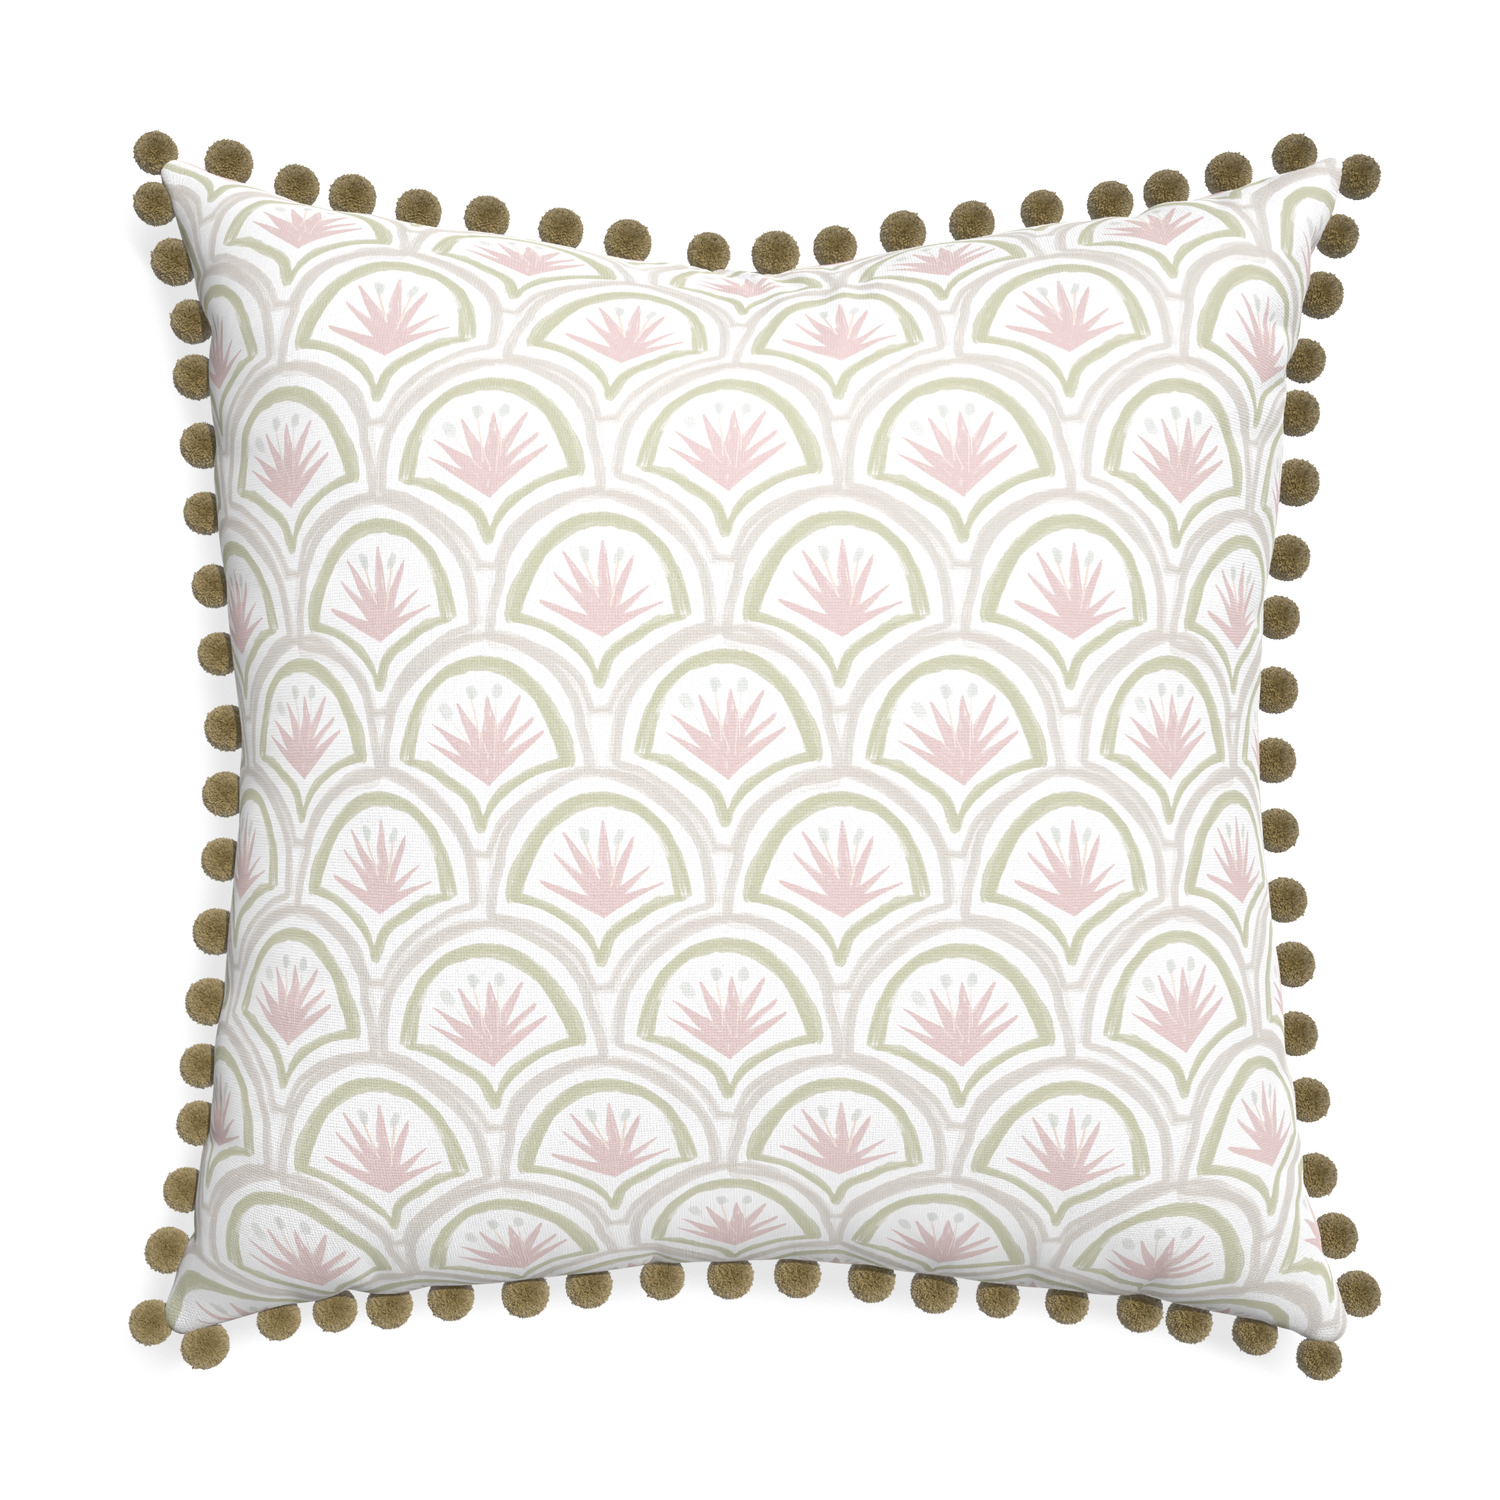 Euro-sham thatcher rose custom pink & green palmpillow with olive pom pom on white background